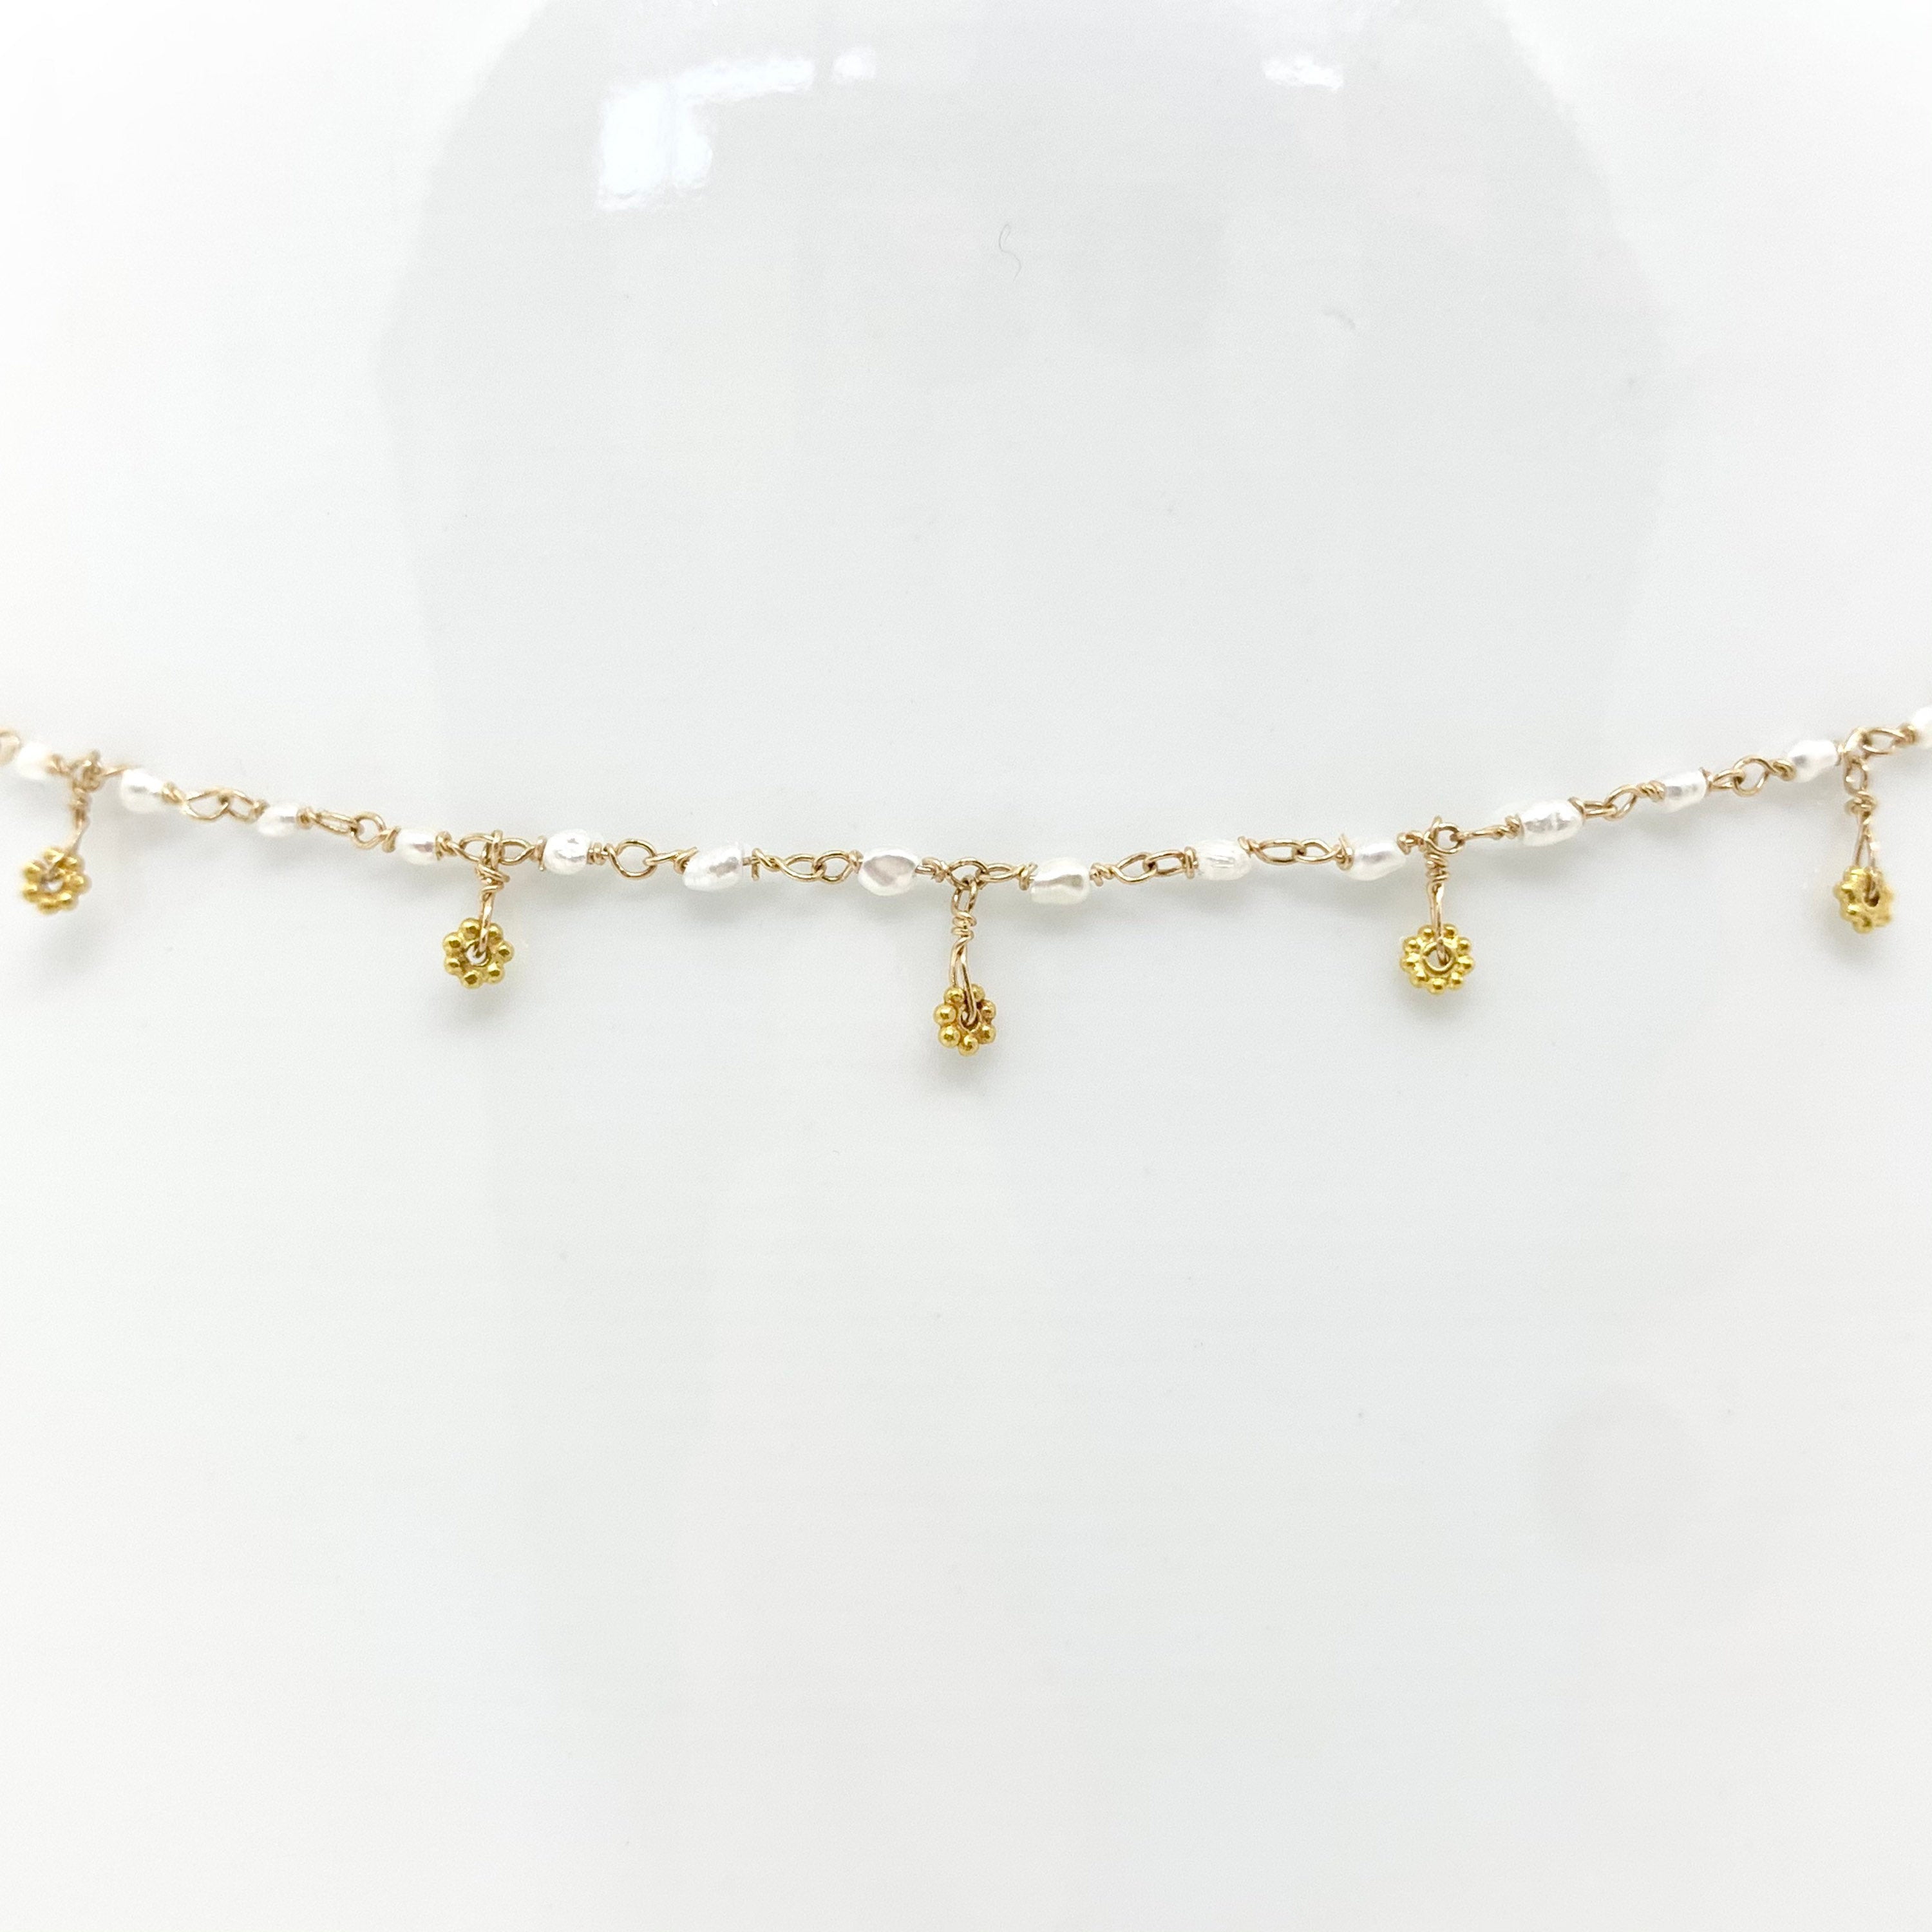 14k Gold Chain Necklace w/ Keshi Pearls, 18k Gold Daisies & Antique Italian Beads